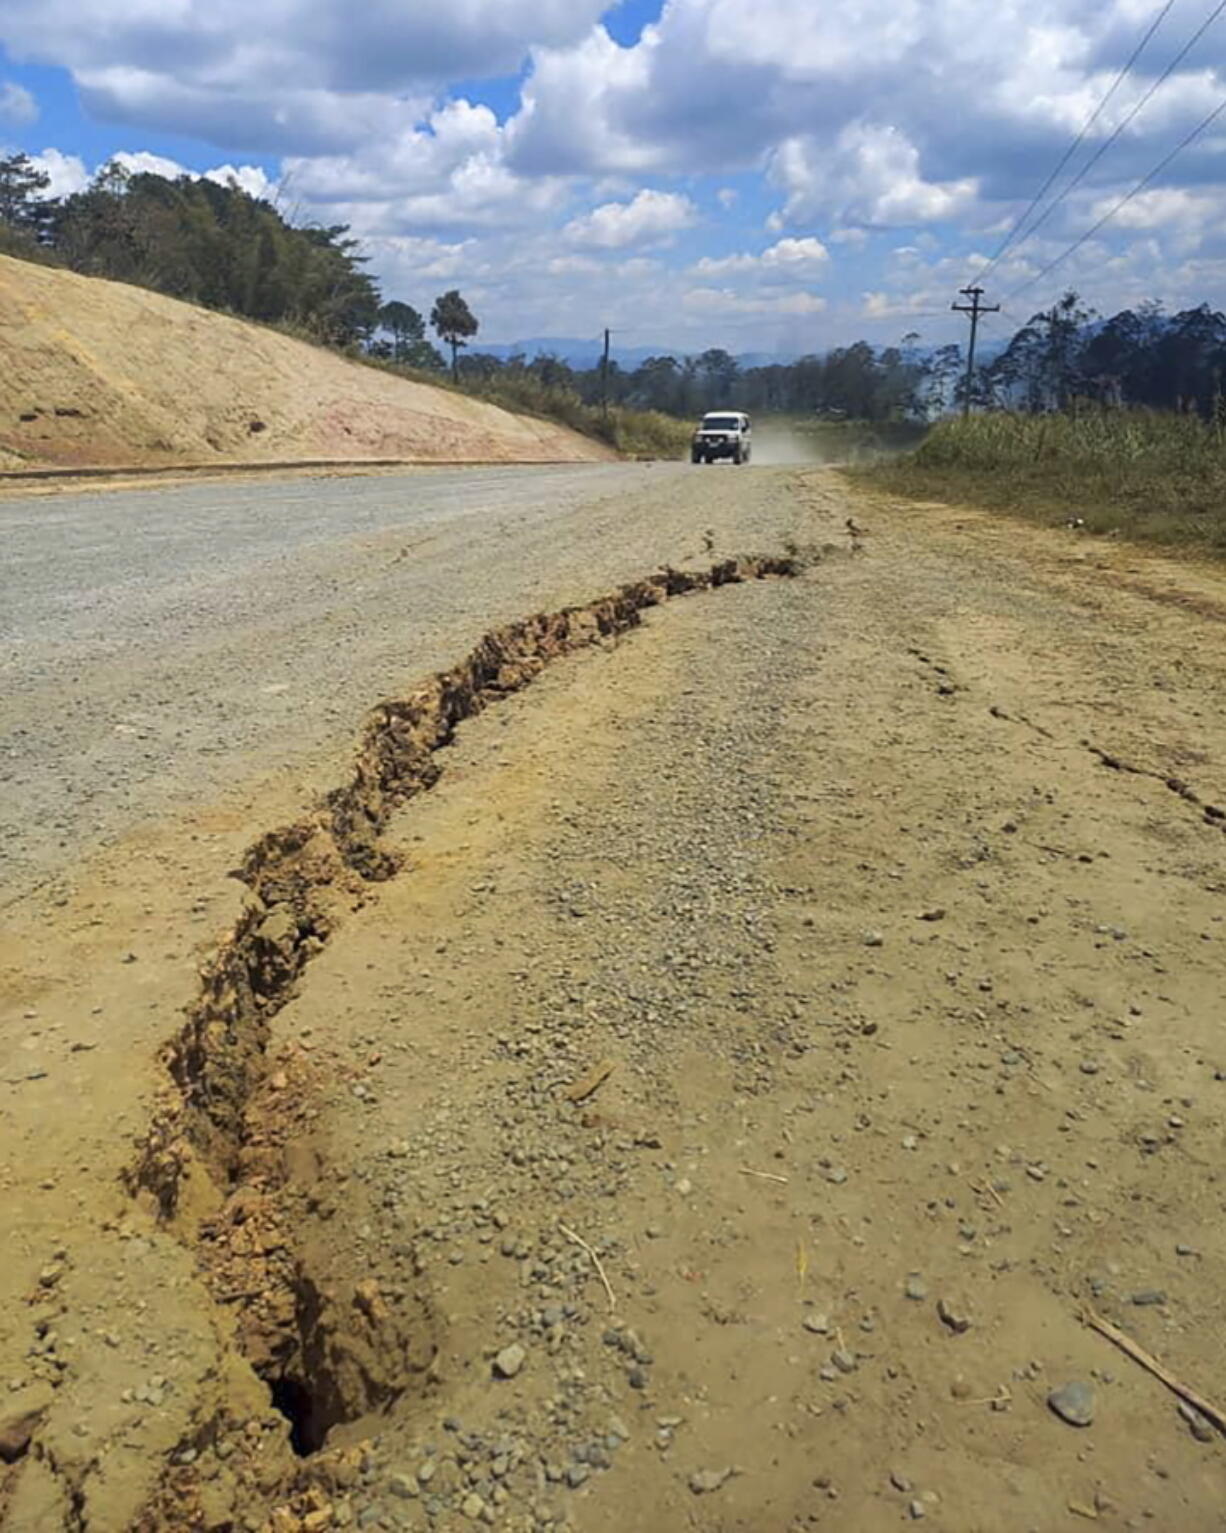 A large crack is seen in a highway near the town of Kainantu, following a 7.6-magnitude earthquake in northeastern Papua New Guinea, Sunday, Sept. 11, 2022. The quake hit at 9:46 a.m. local time, with the epicenter 67 kilometers (42 miles) east of Kainantu, a sparsely populated area.